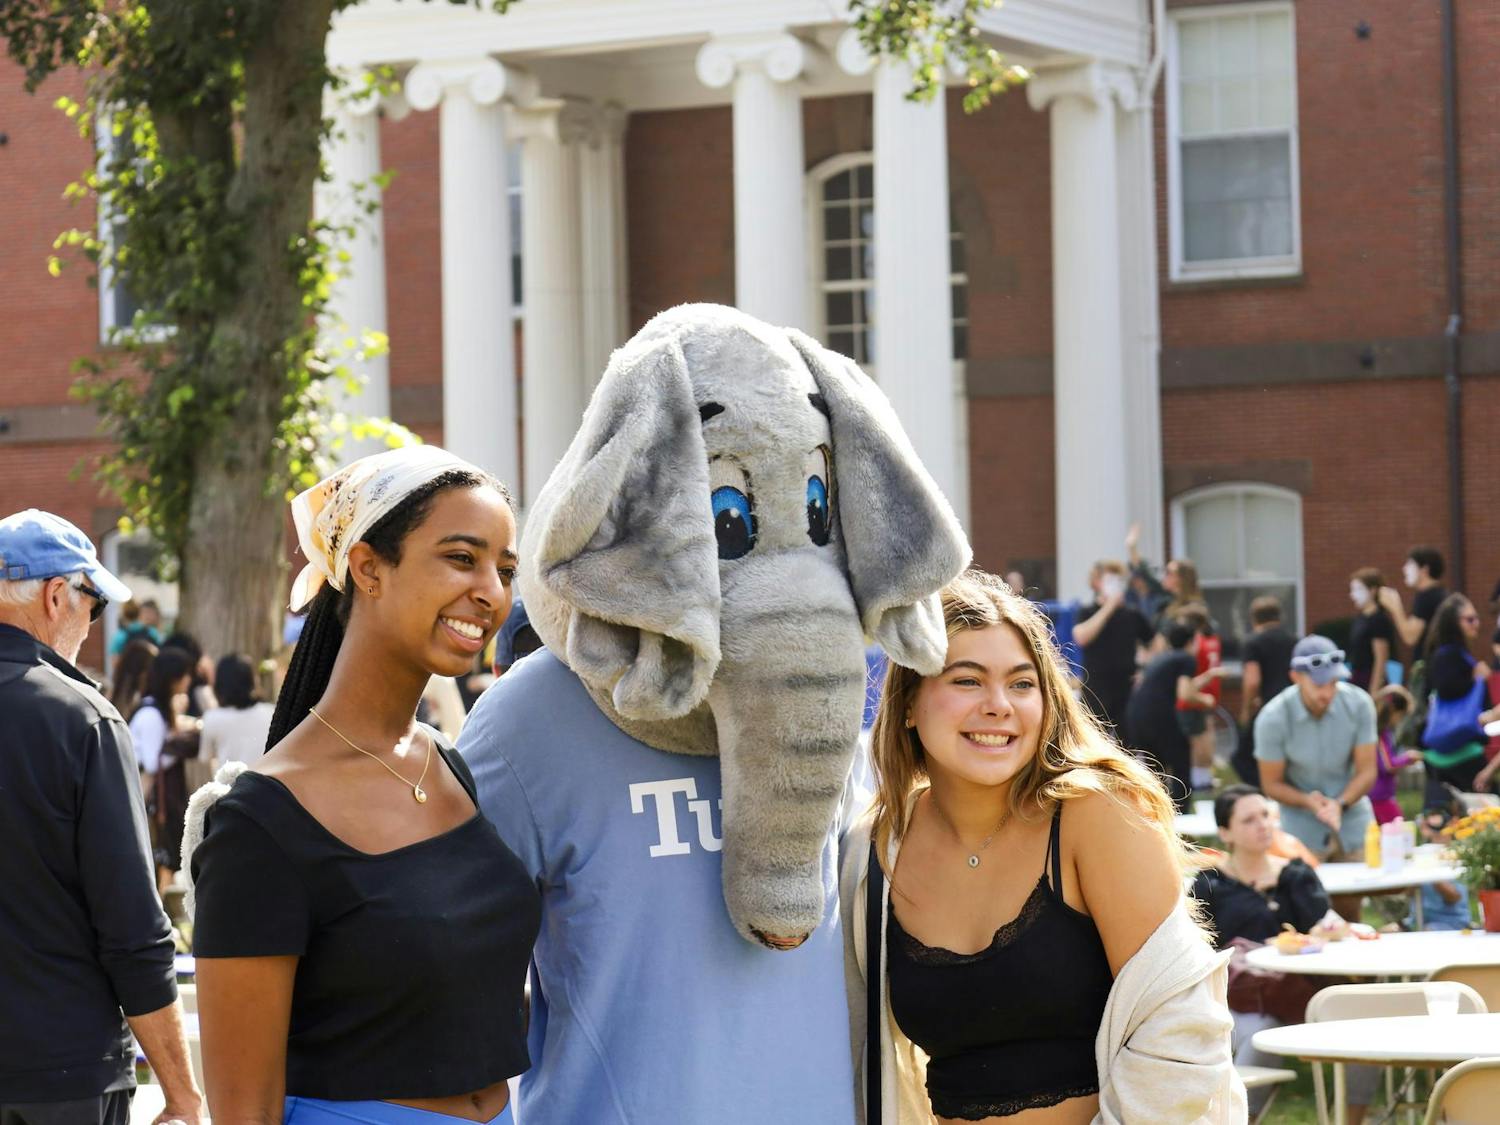 Jumbo is pictured with community members on the academic quad at Tufts Community day on Oct. 1.